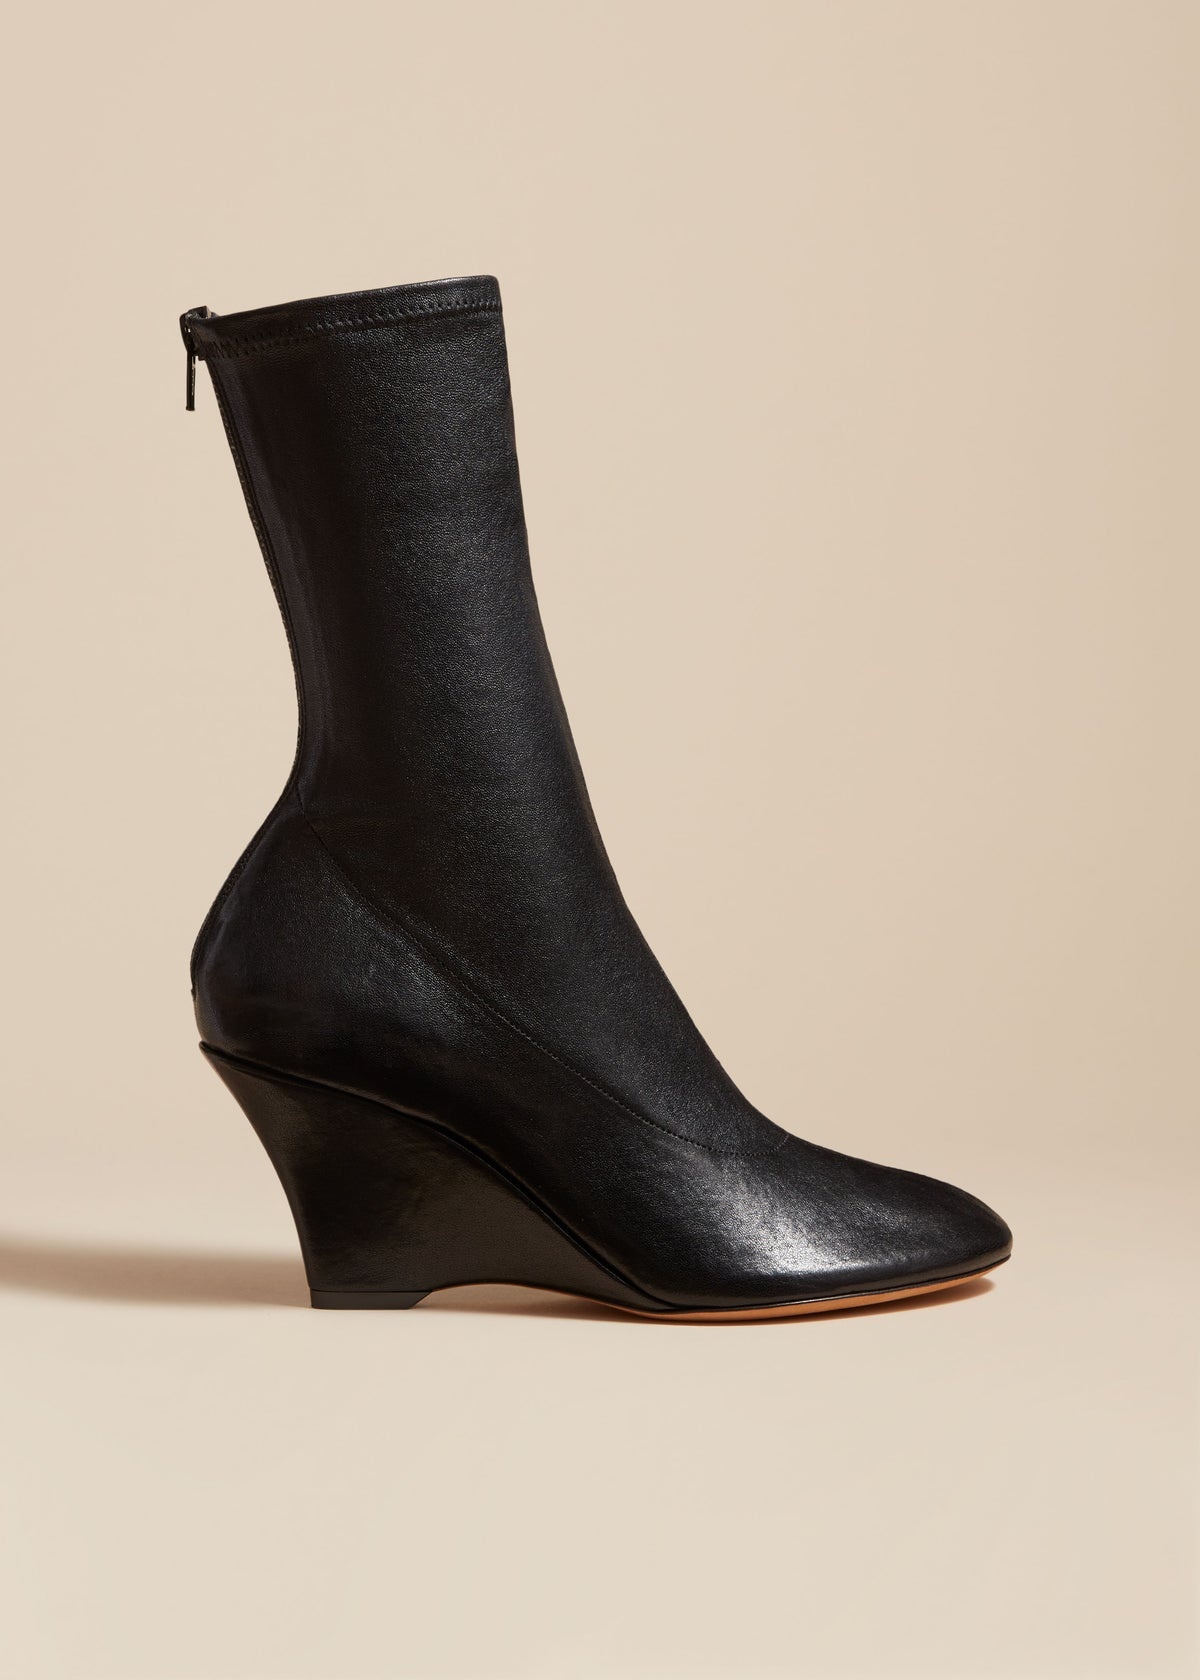 The Apollo Wedge Boot in Black Leather - 1